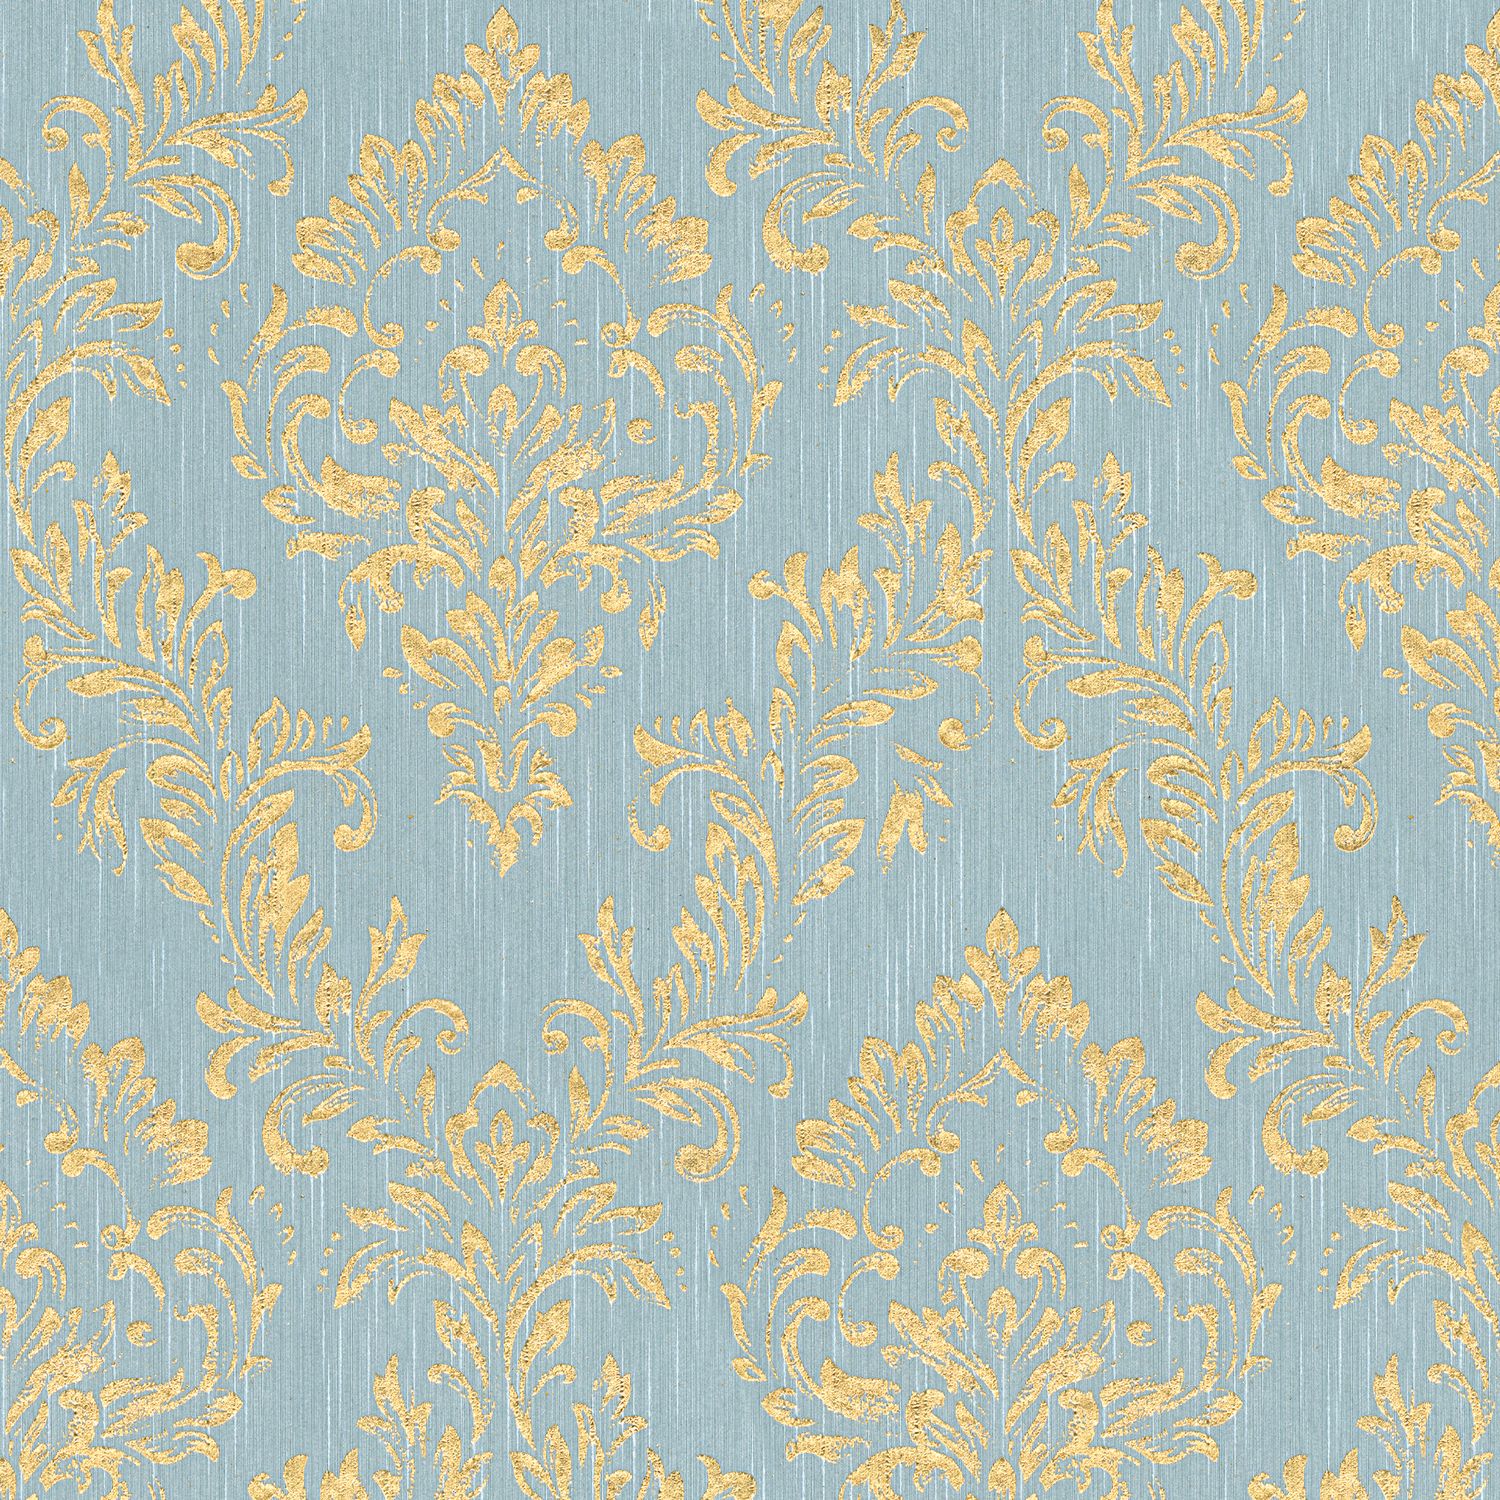 Baroque wallcovering wall Profhome 306595-GU textile wallpaper textured  baroque style shiny gold blue green 5.33 m2 (57 ft2)